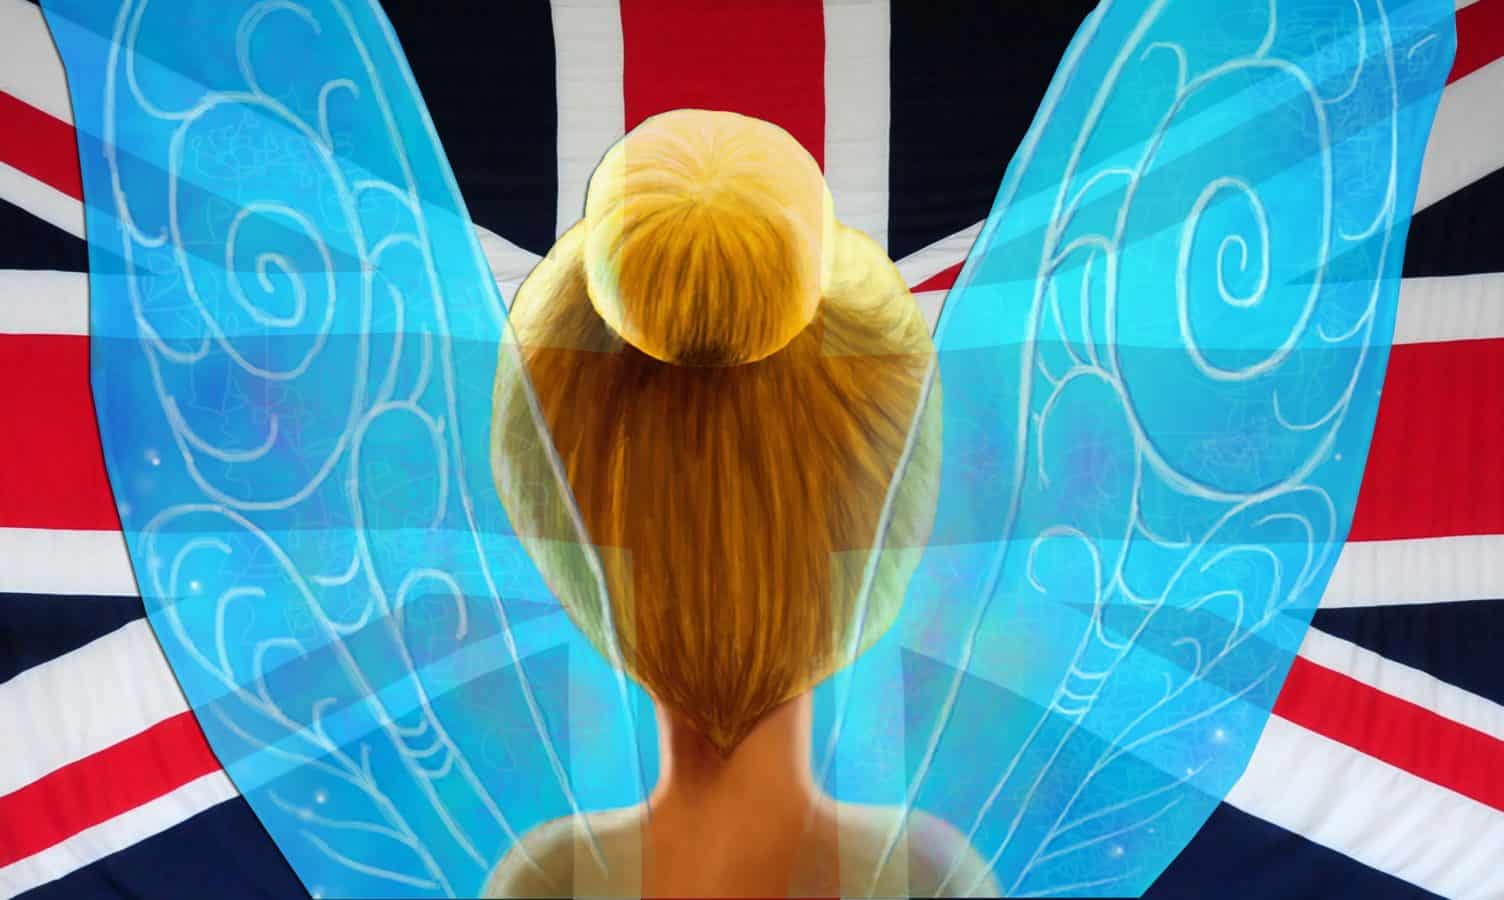 Tinkerbell politics is carrying us down the road to ruin